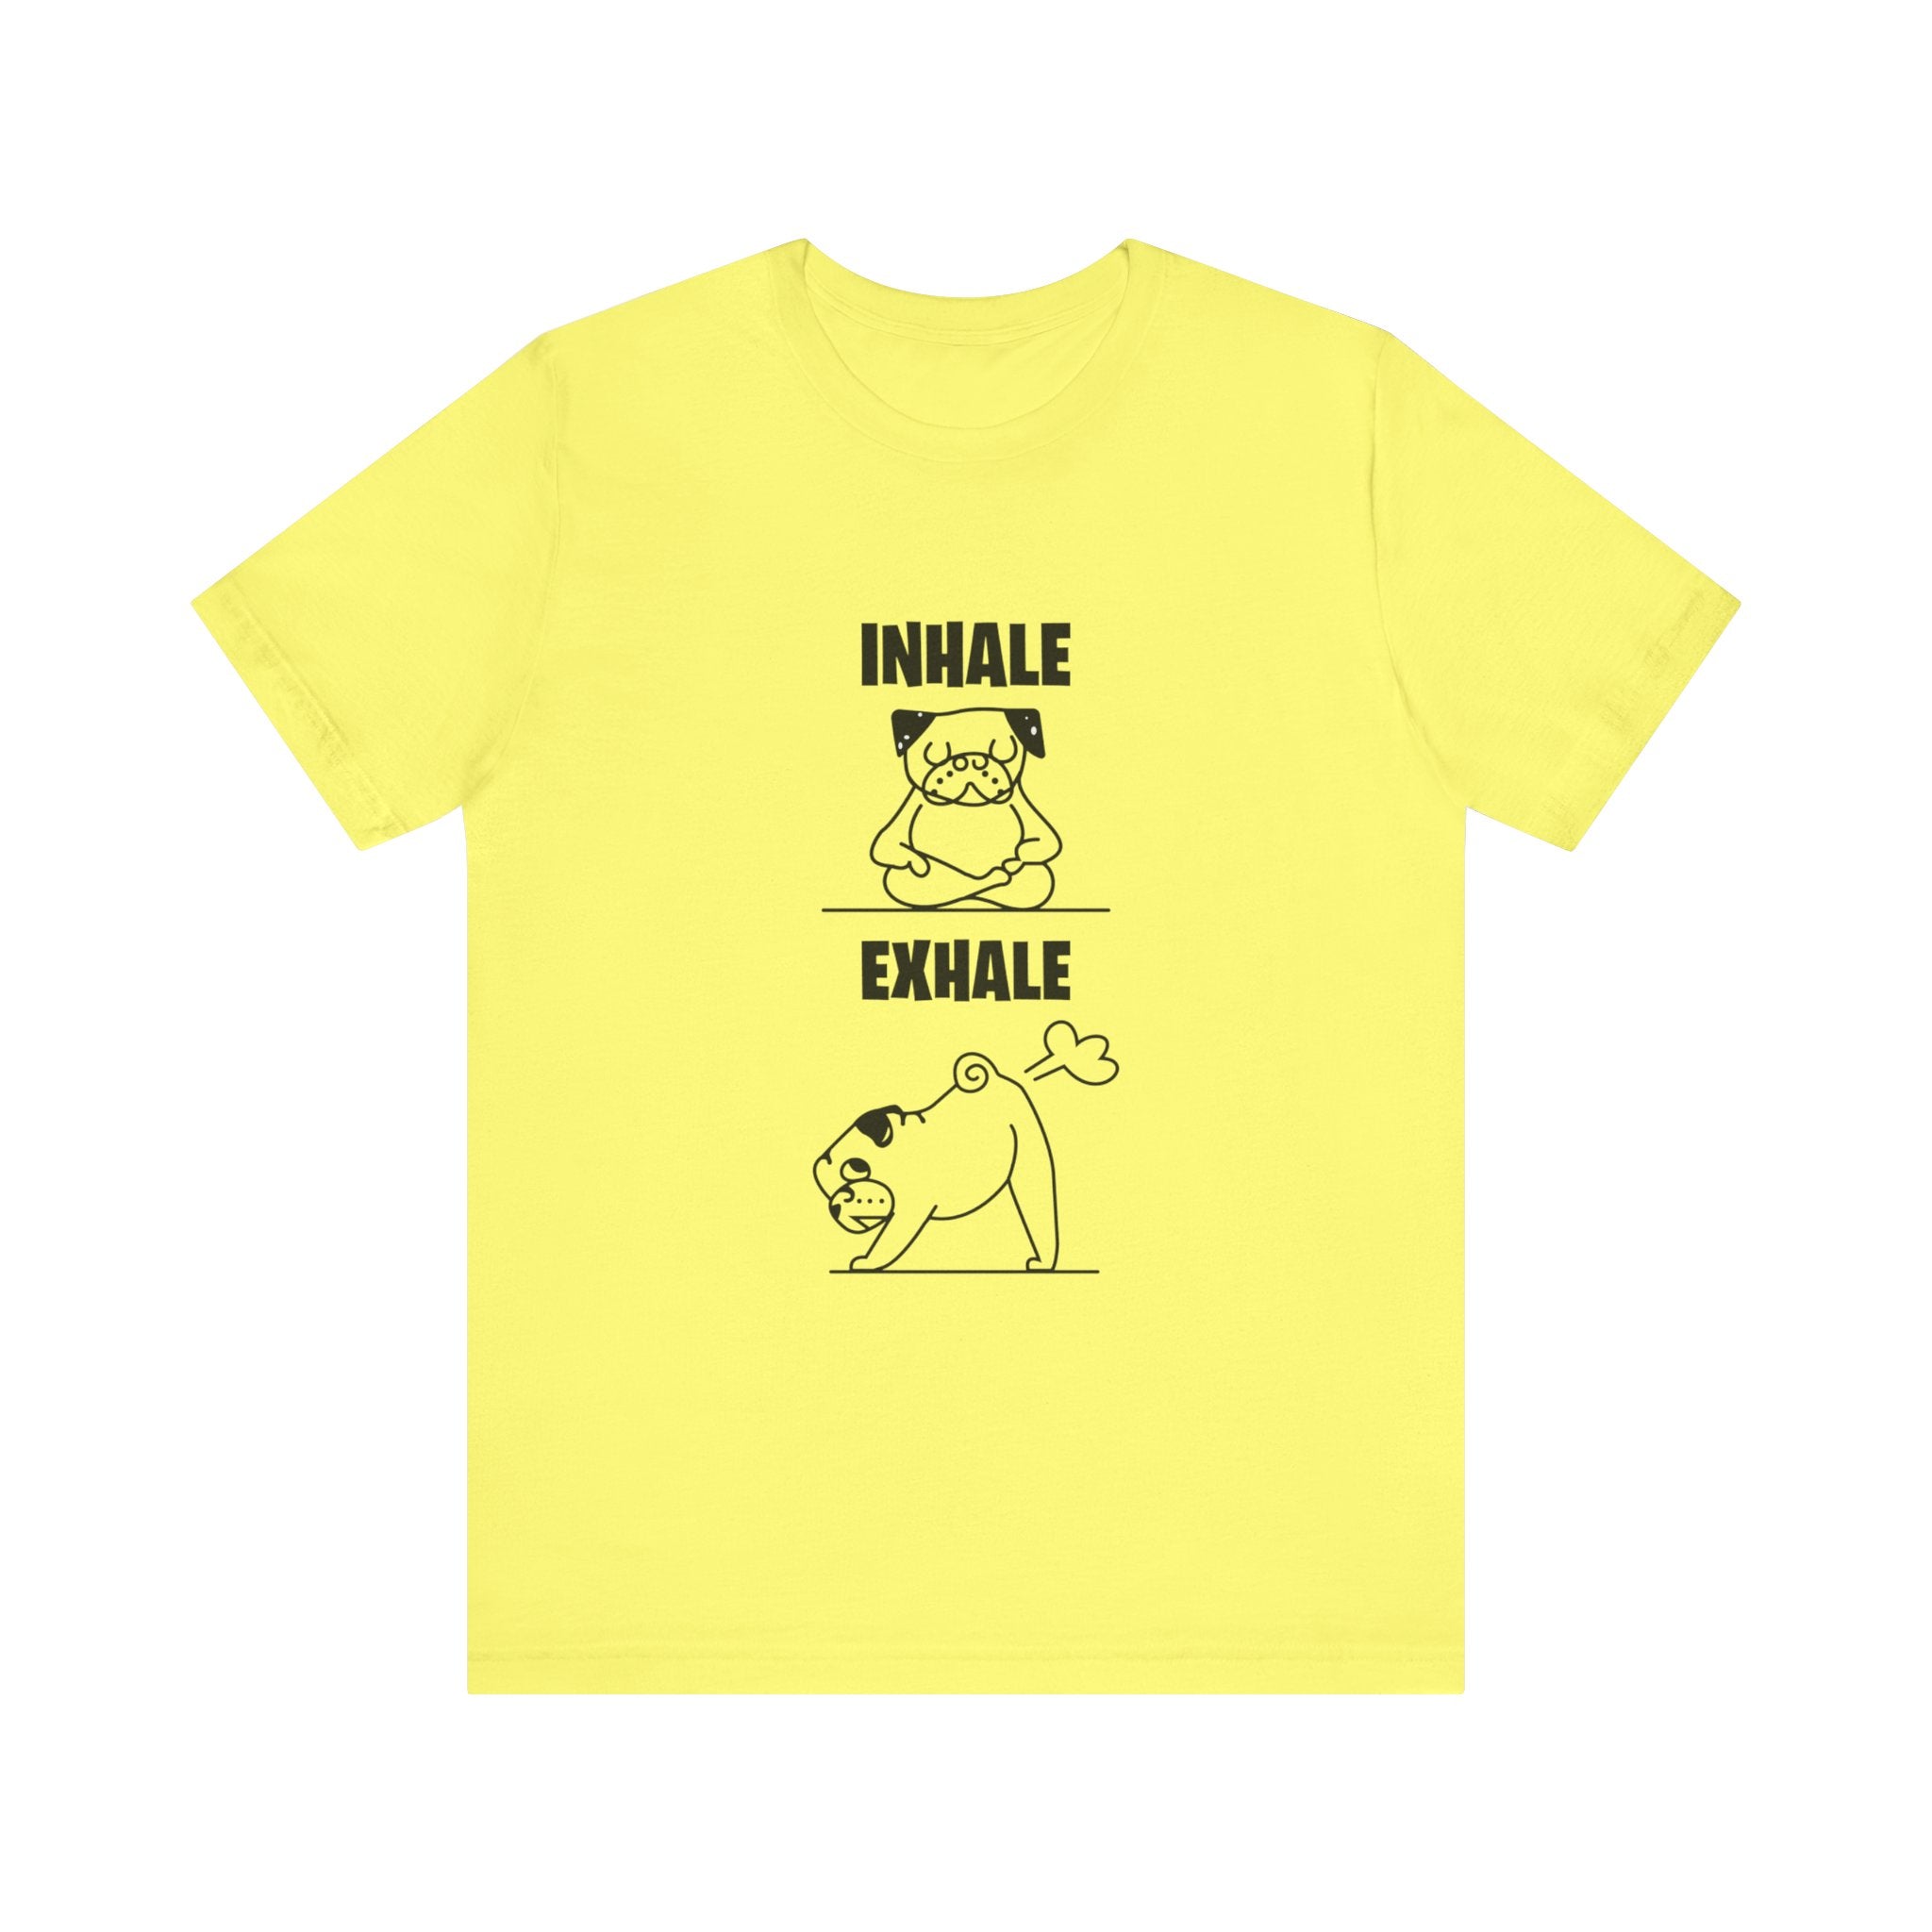 Yellow unisex tee with a humorous graphic featuring a stressed cat with "inhale" and a relaxed cat with "exhale" written above and below, in quality print.